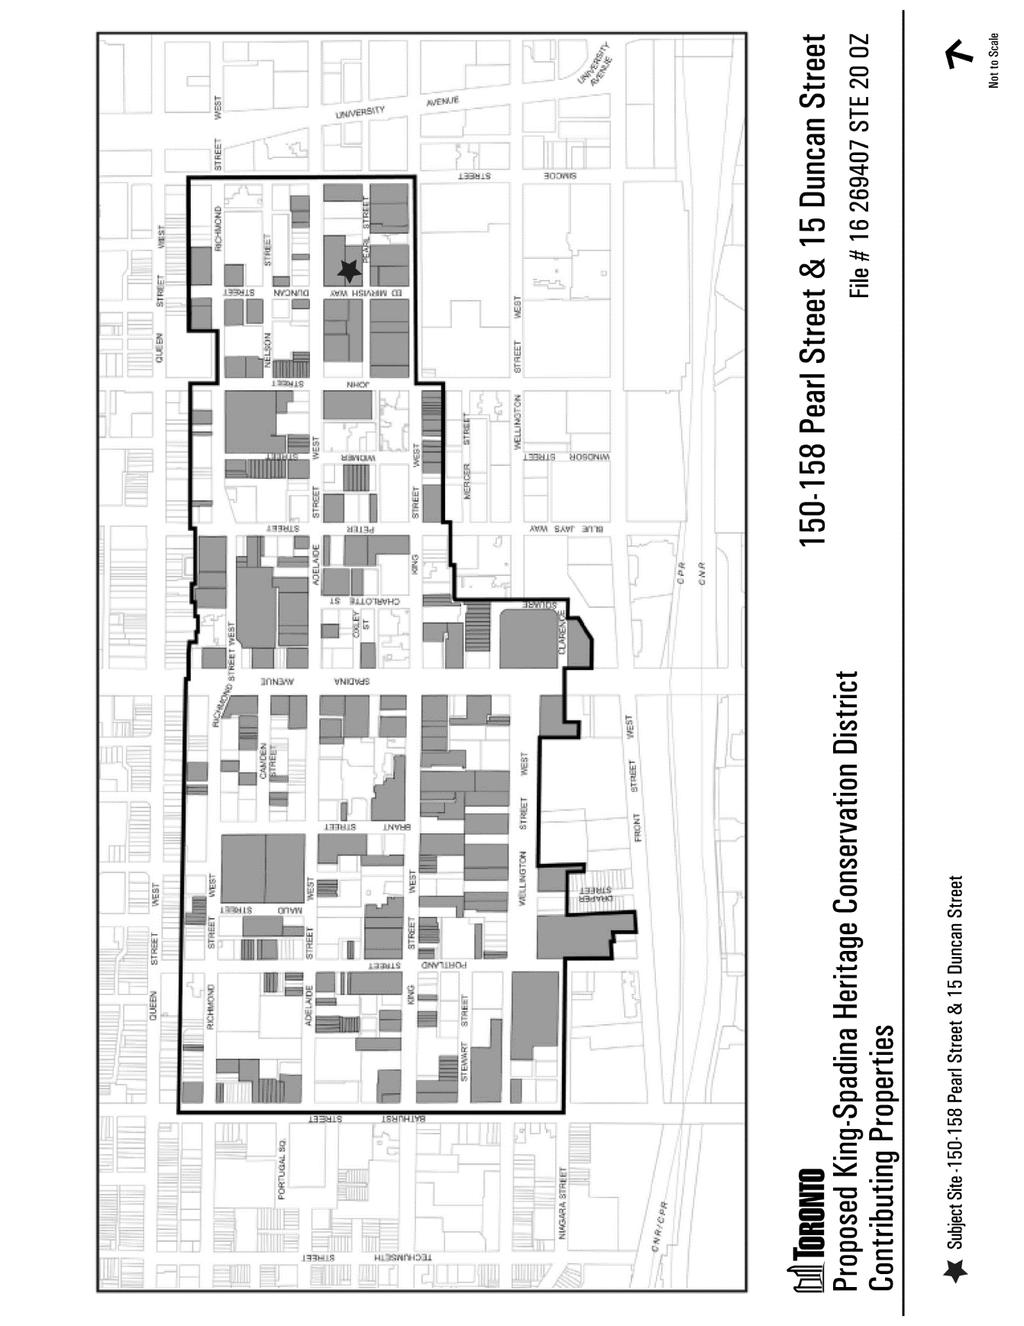 Attachment 9: King-Spadina Heritage Conservation District Plan Staff report